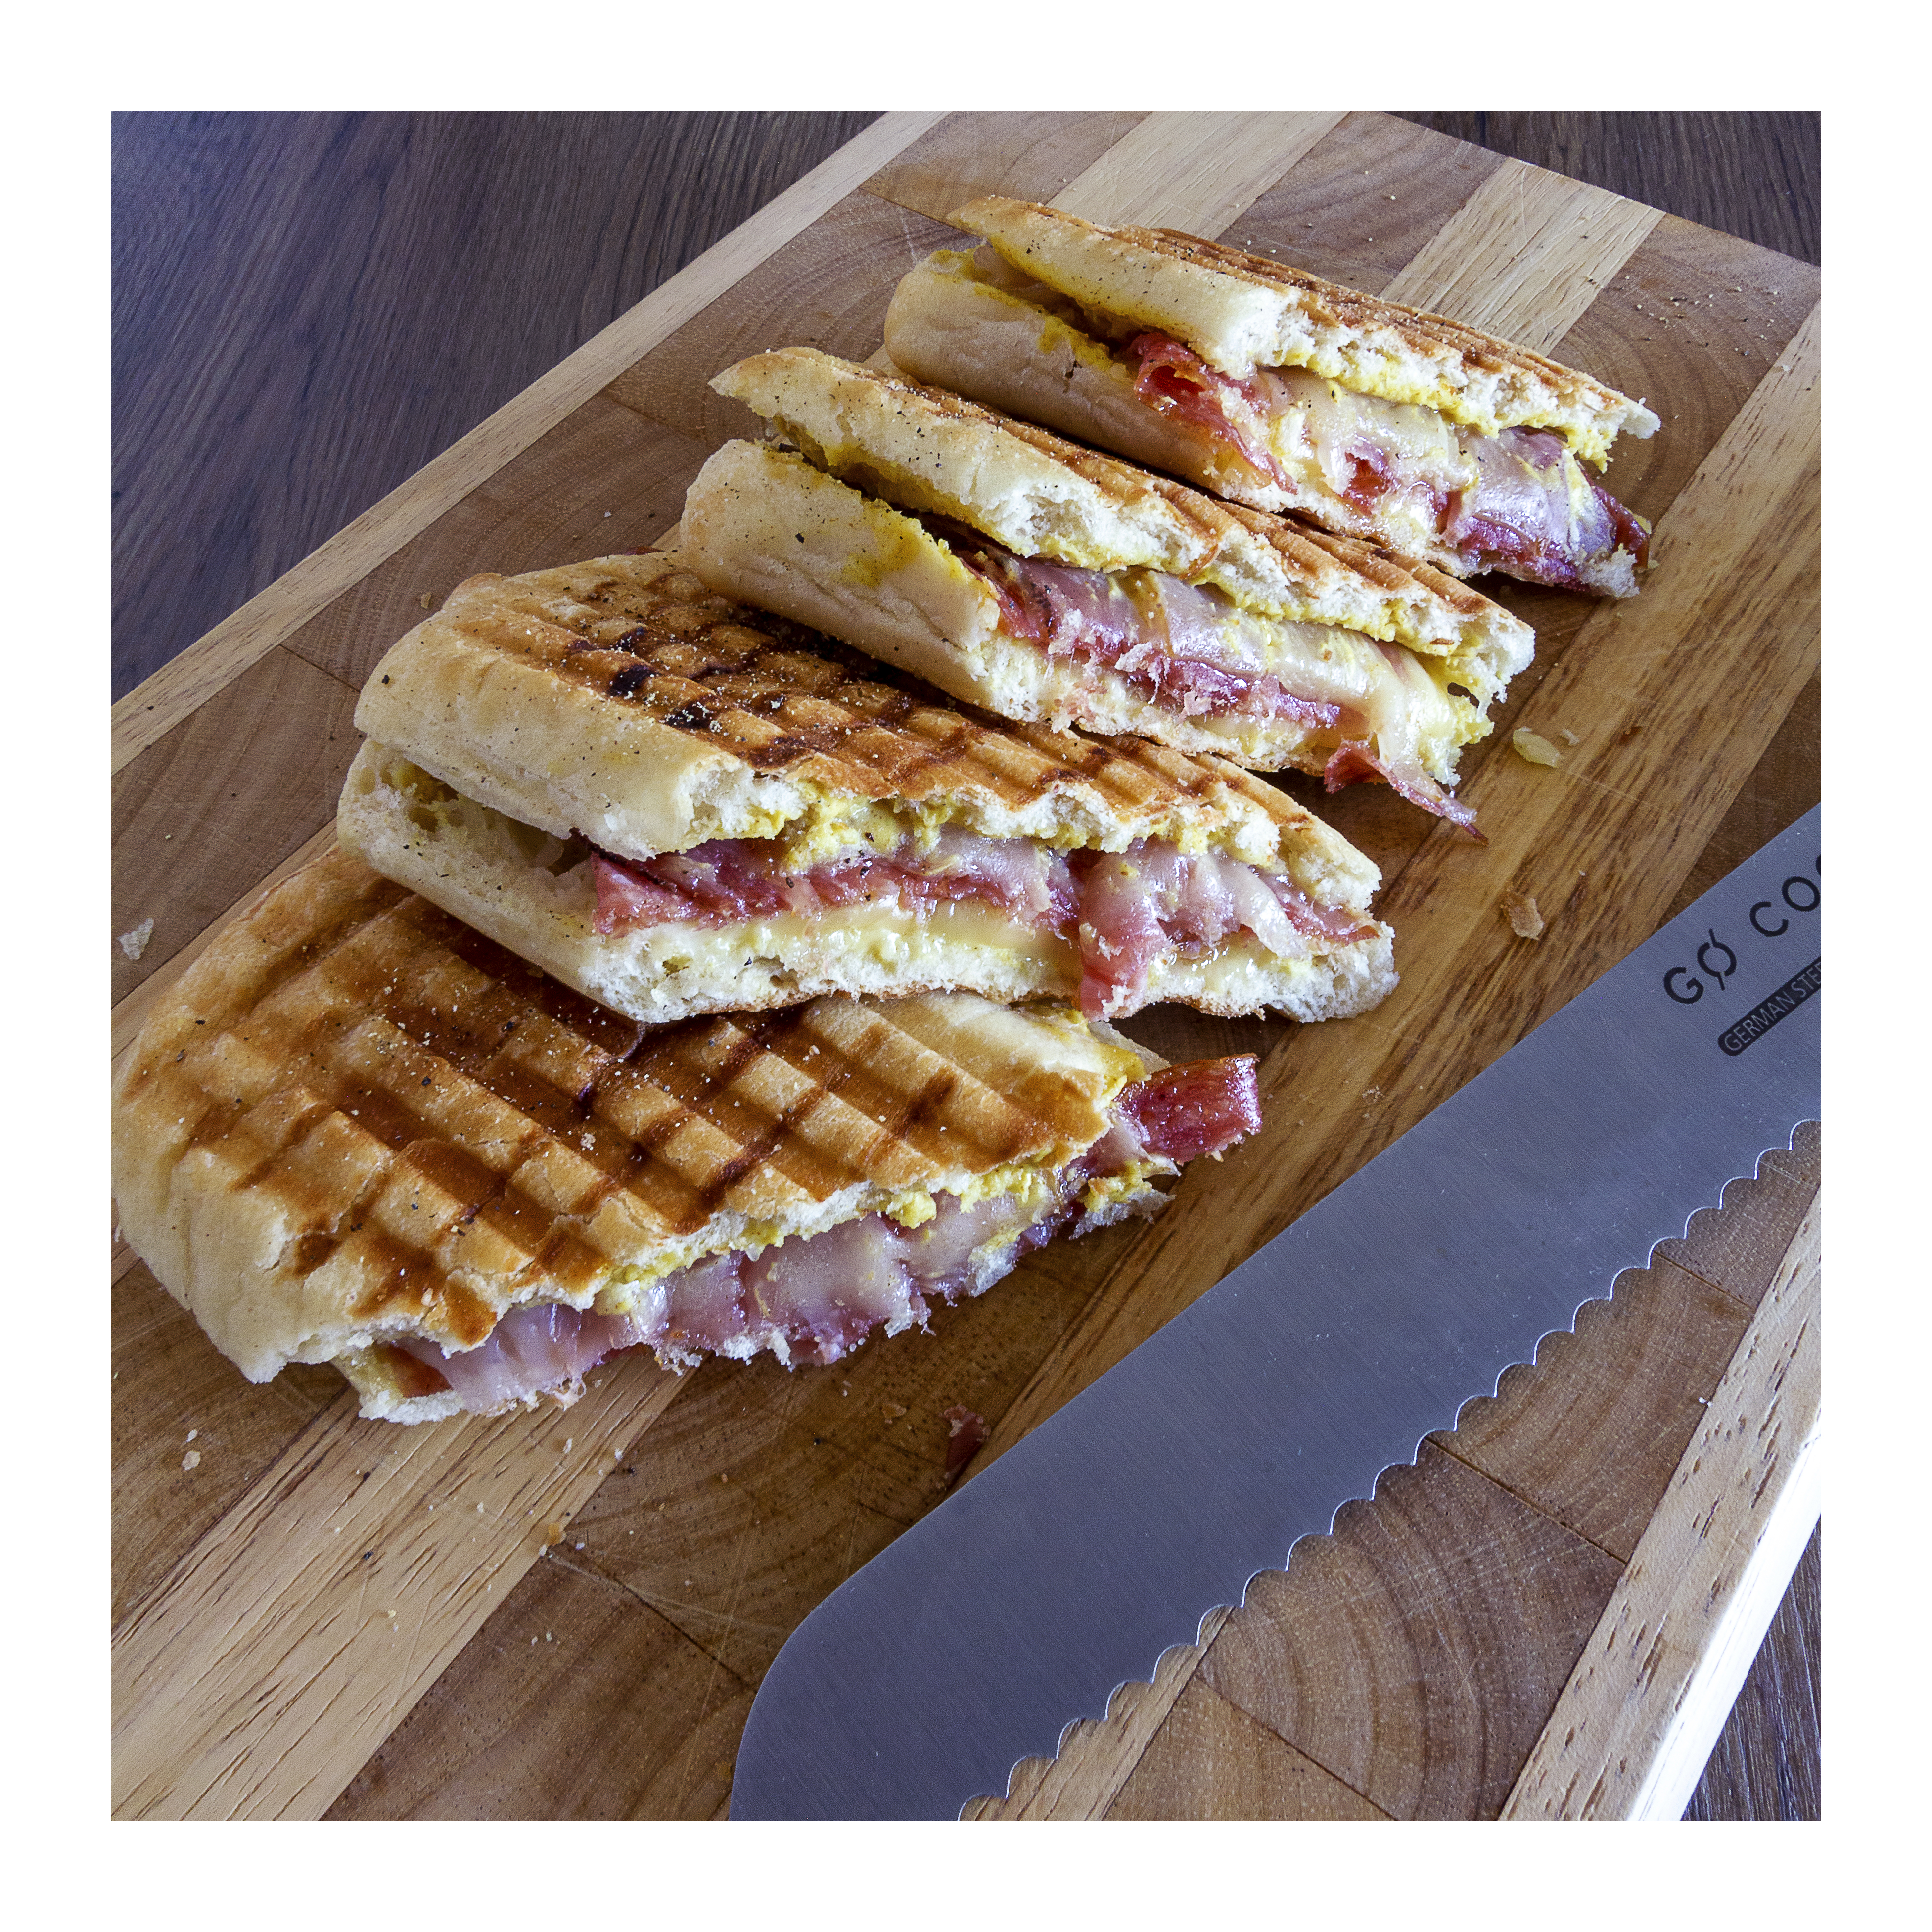 General 3906x3906 panini food food crumbs lunch meat cheese toast cutting board wooden surface closeup photography spices table knife bread